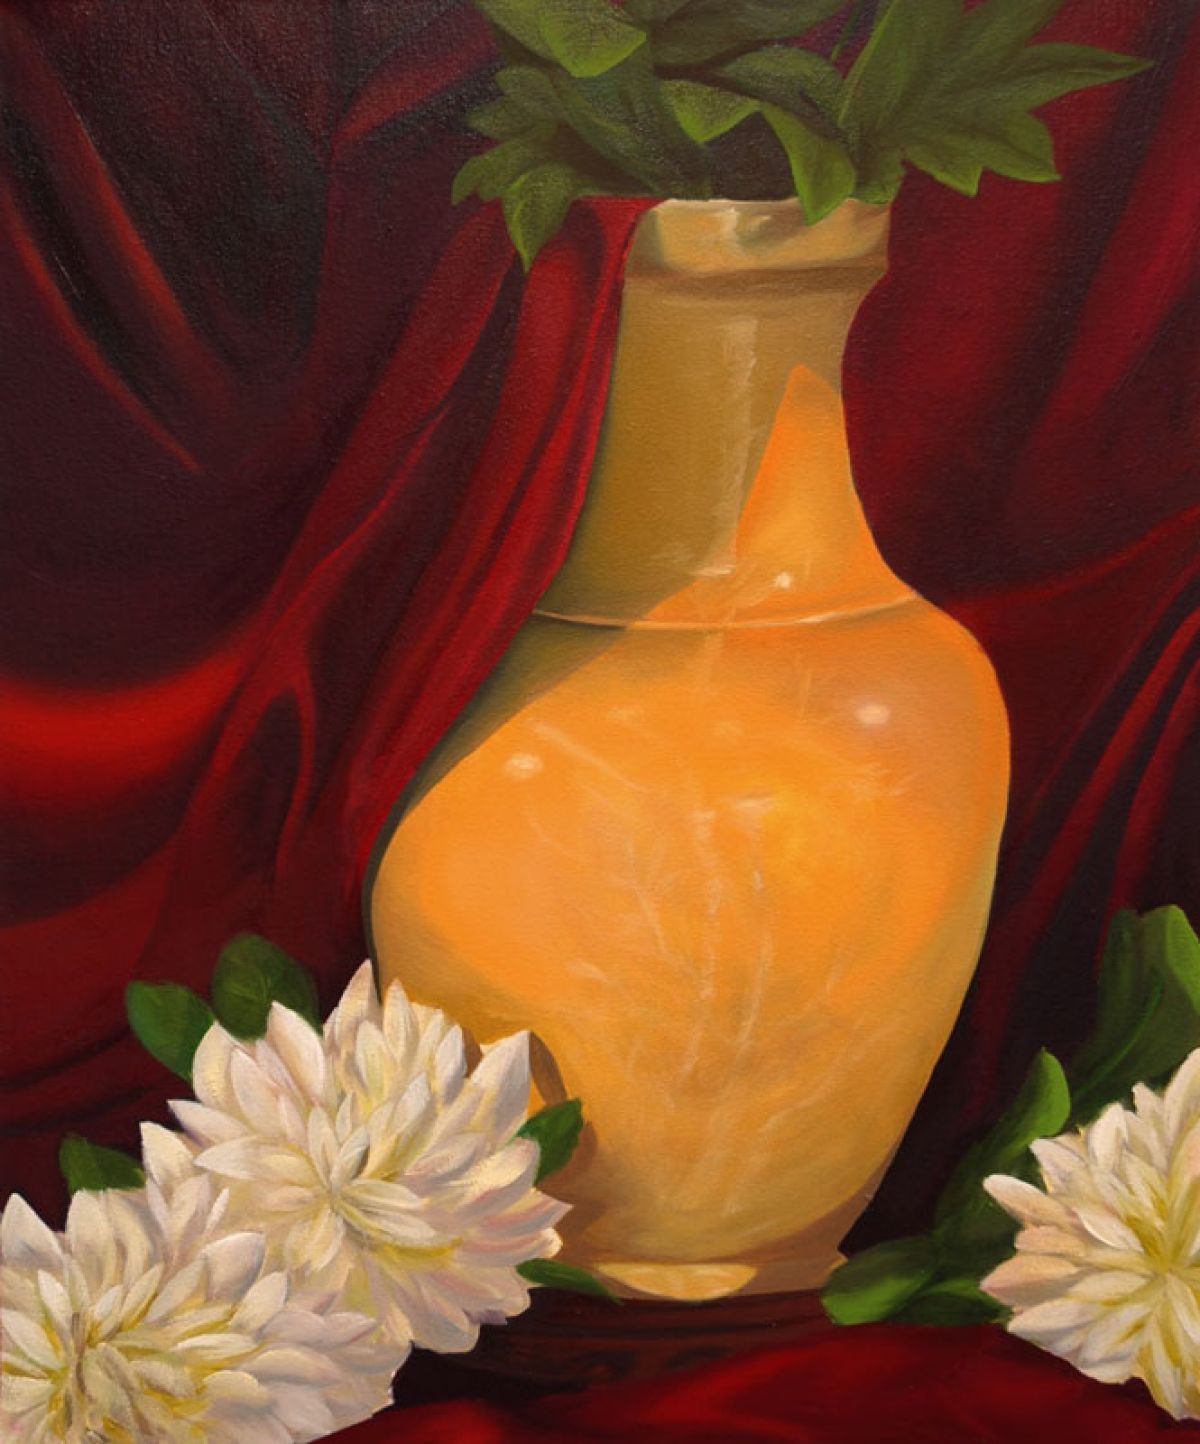 2007, Oil on Canvas, 23 1/2 x 20 in.